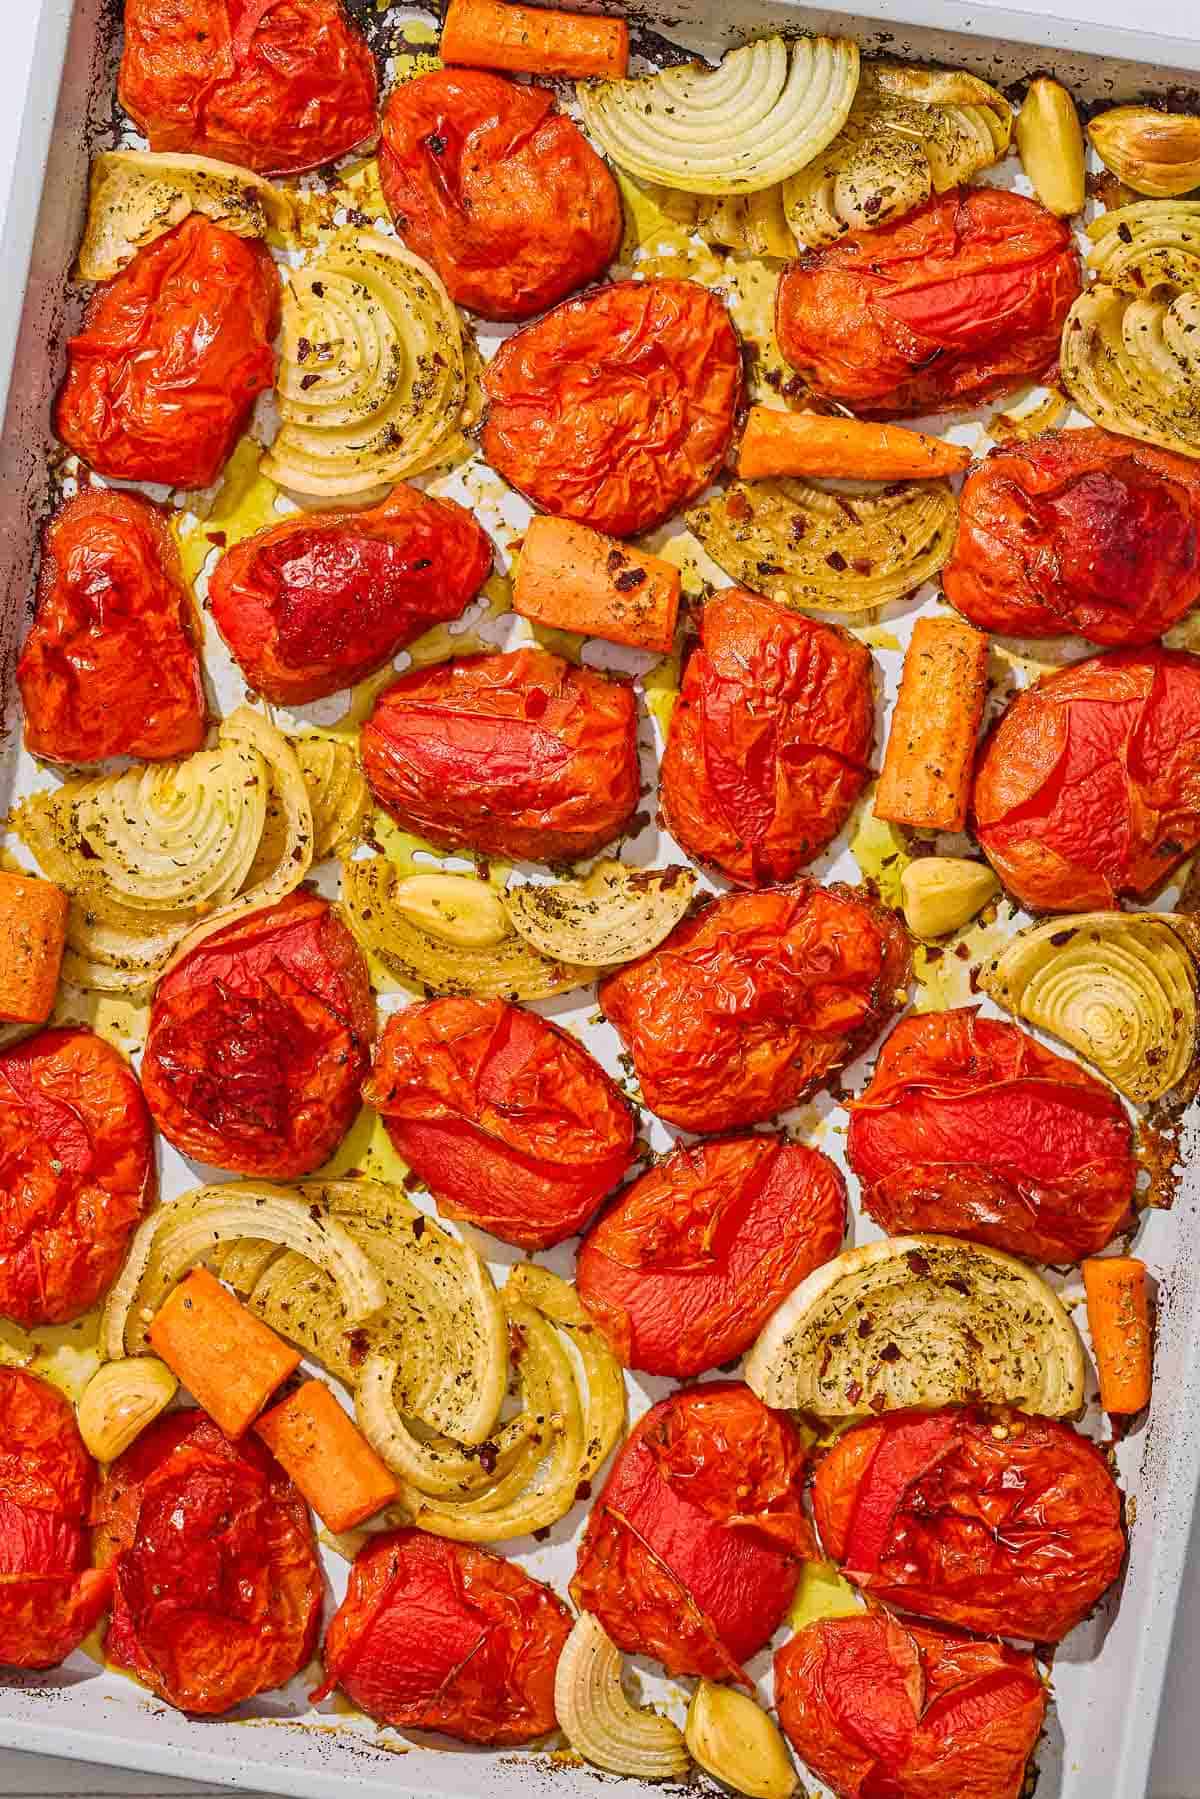 An overhead photo of roasted onions, tomatoes, carrots and garlic on a baking sheet.